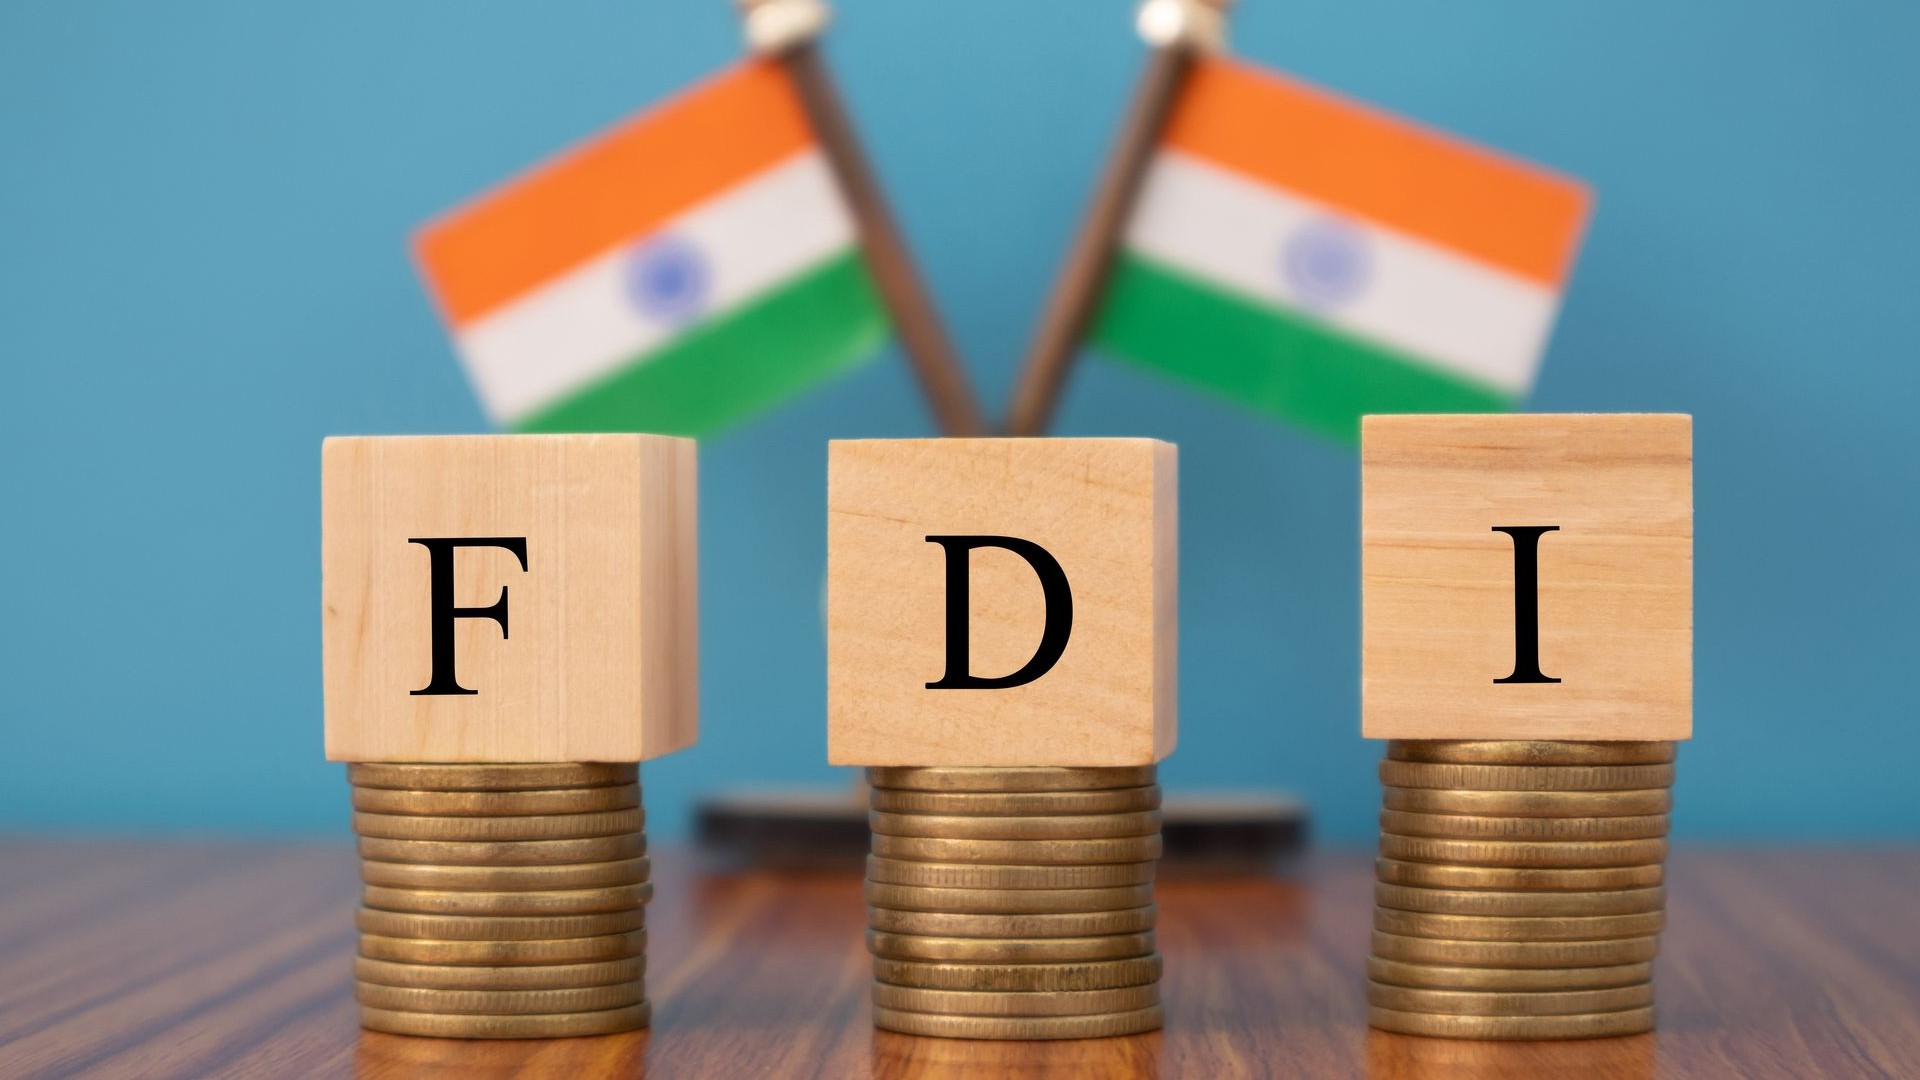 India receives Rs 5 lakh Crore FDI in 2020, making it the 5th largest ...